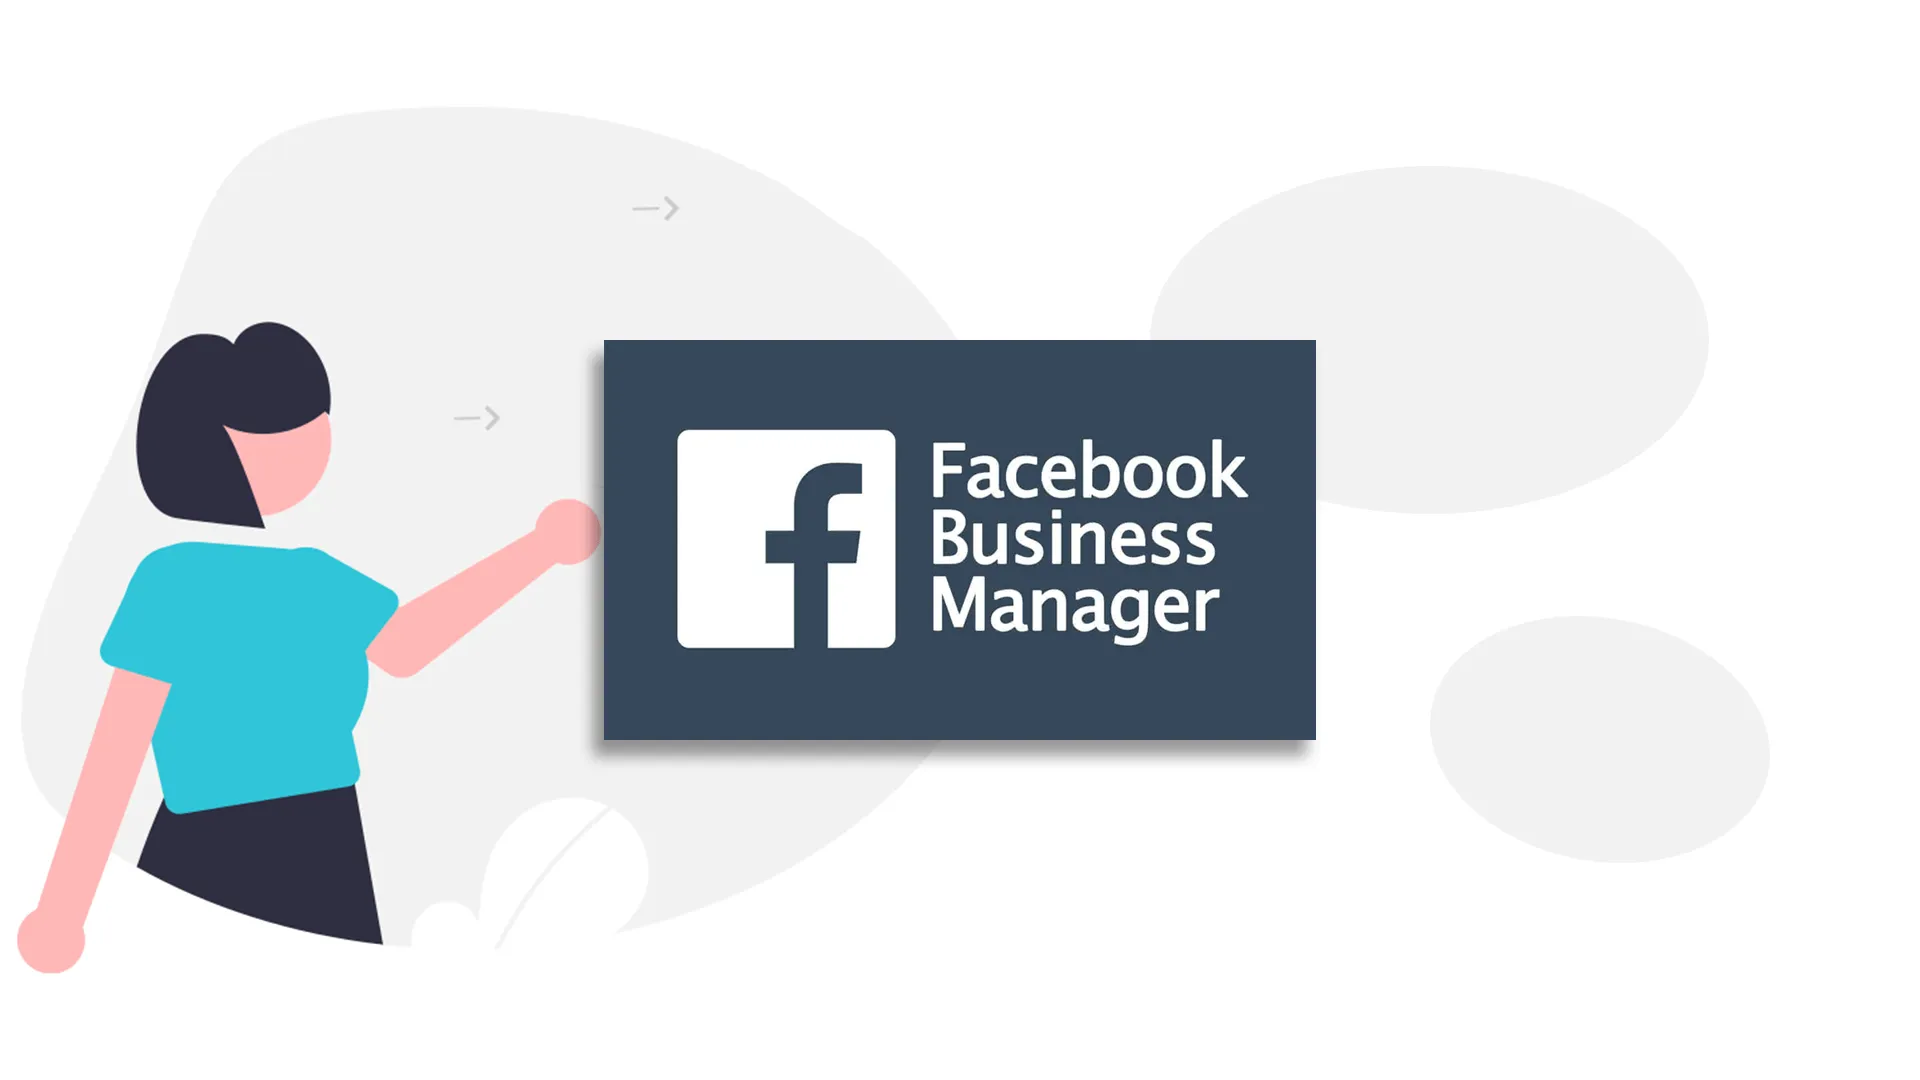 buy verified facebook business manager